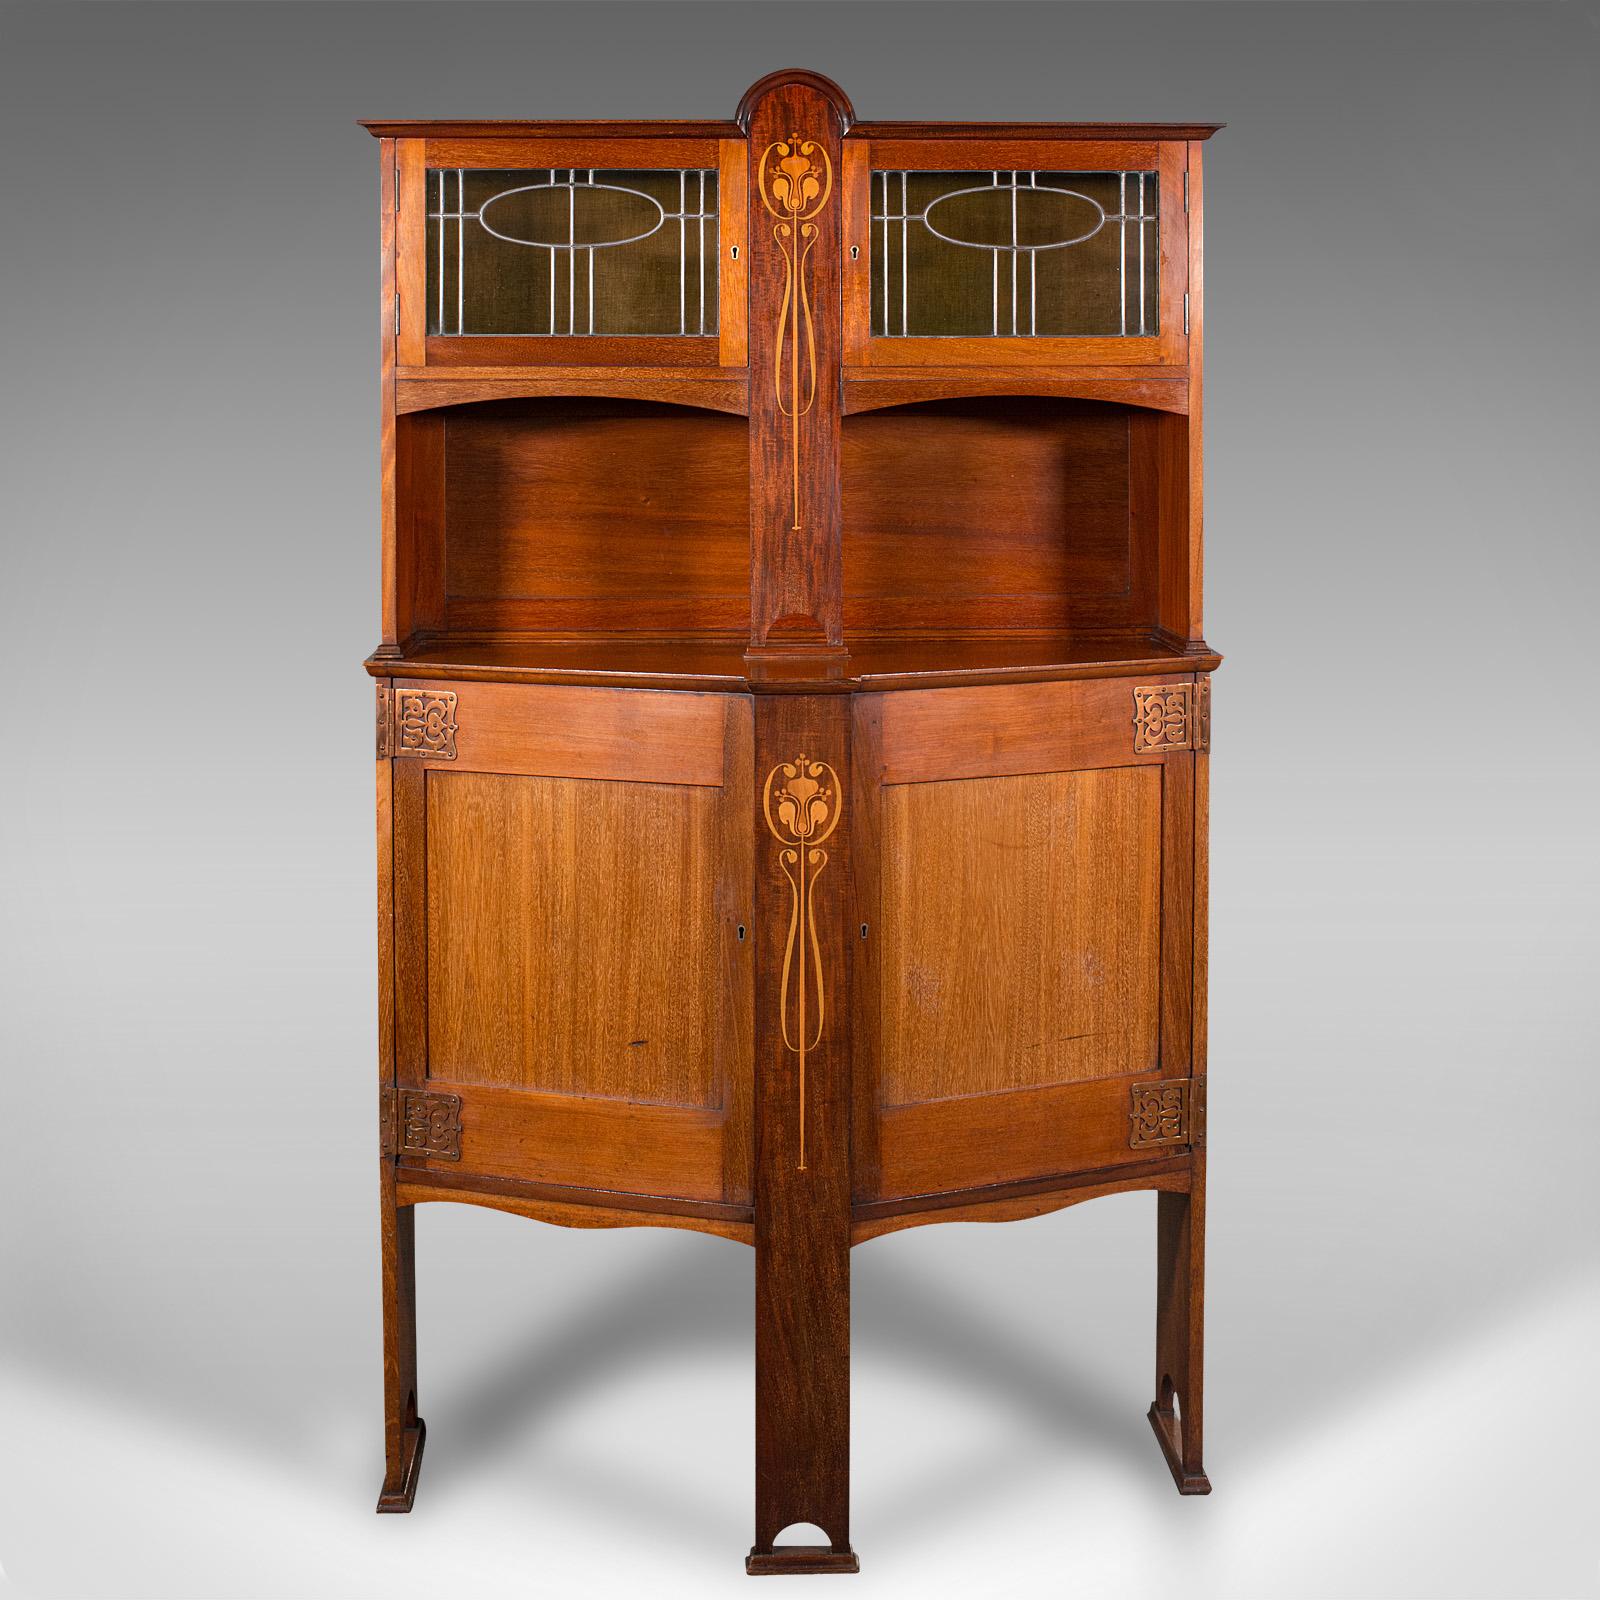 This is a striking antique cocktail cabinet. An English, walnut sideboard cupboard in the Arts & Crafts taste and the manner of Liberty, dating to the late Victorian period, circa 1900.

Utterly dashing cabinetry with superb finish and